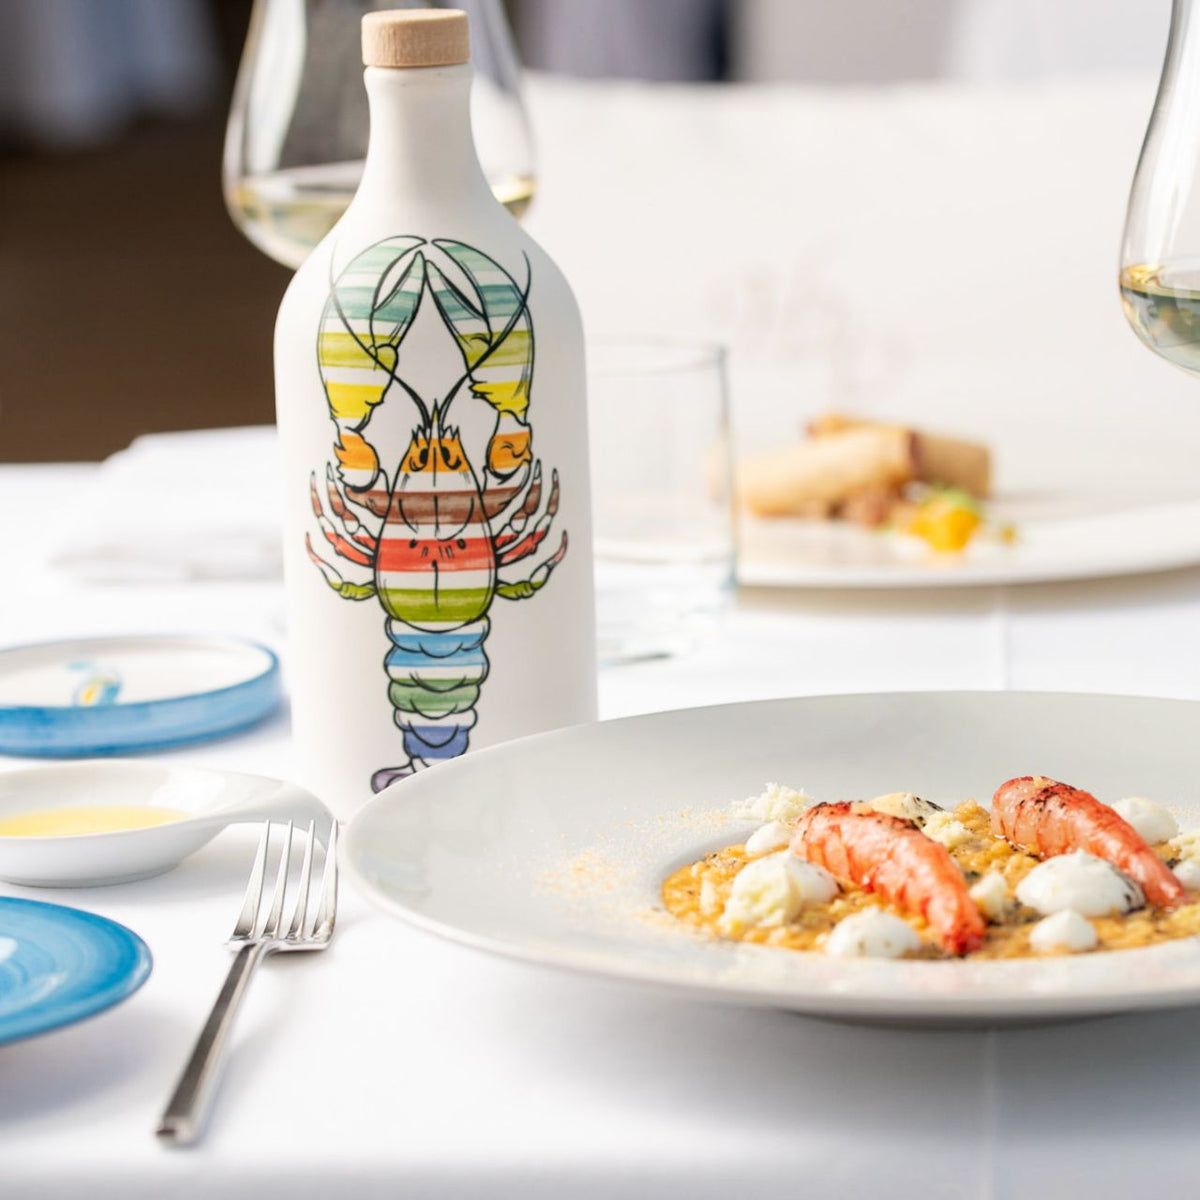 Frantoio Muraglia Lobster Pop Art Collection Intense Fruity Coratina Extra Virgin Olive Oil 500ml | Imported and distributed in the UK by Just Gourmet Foods